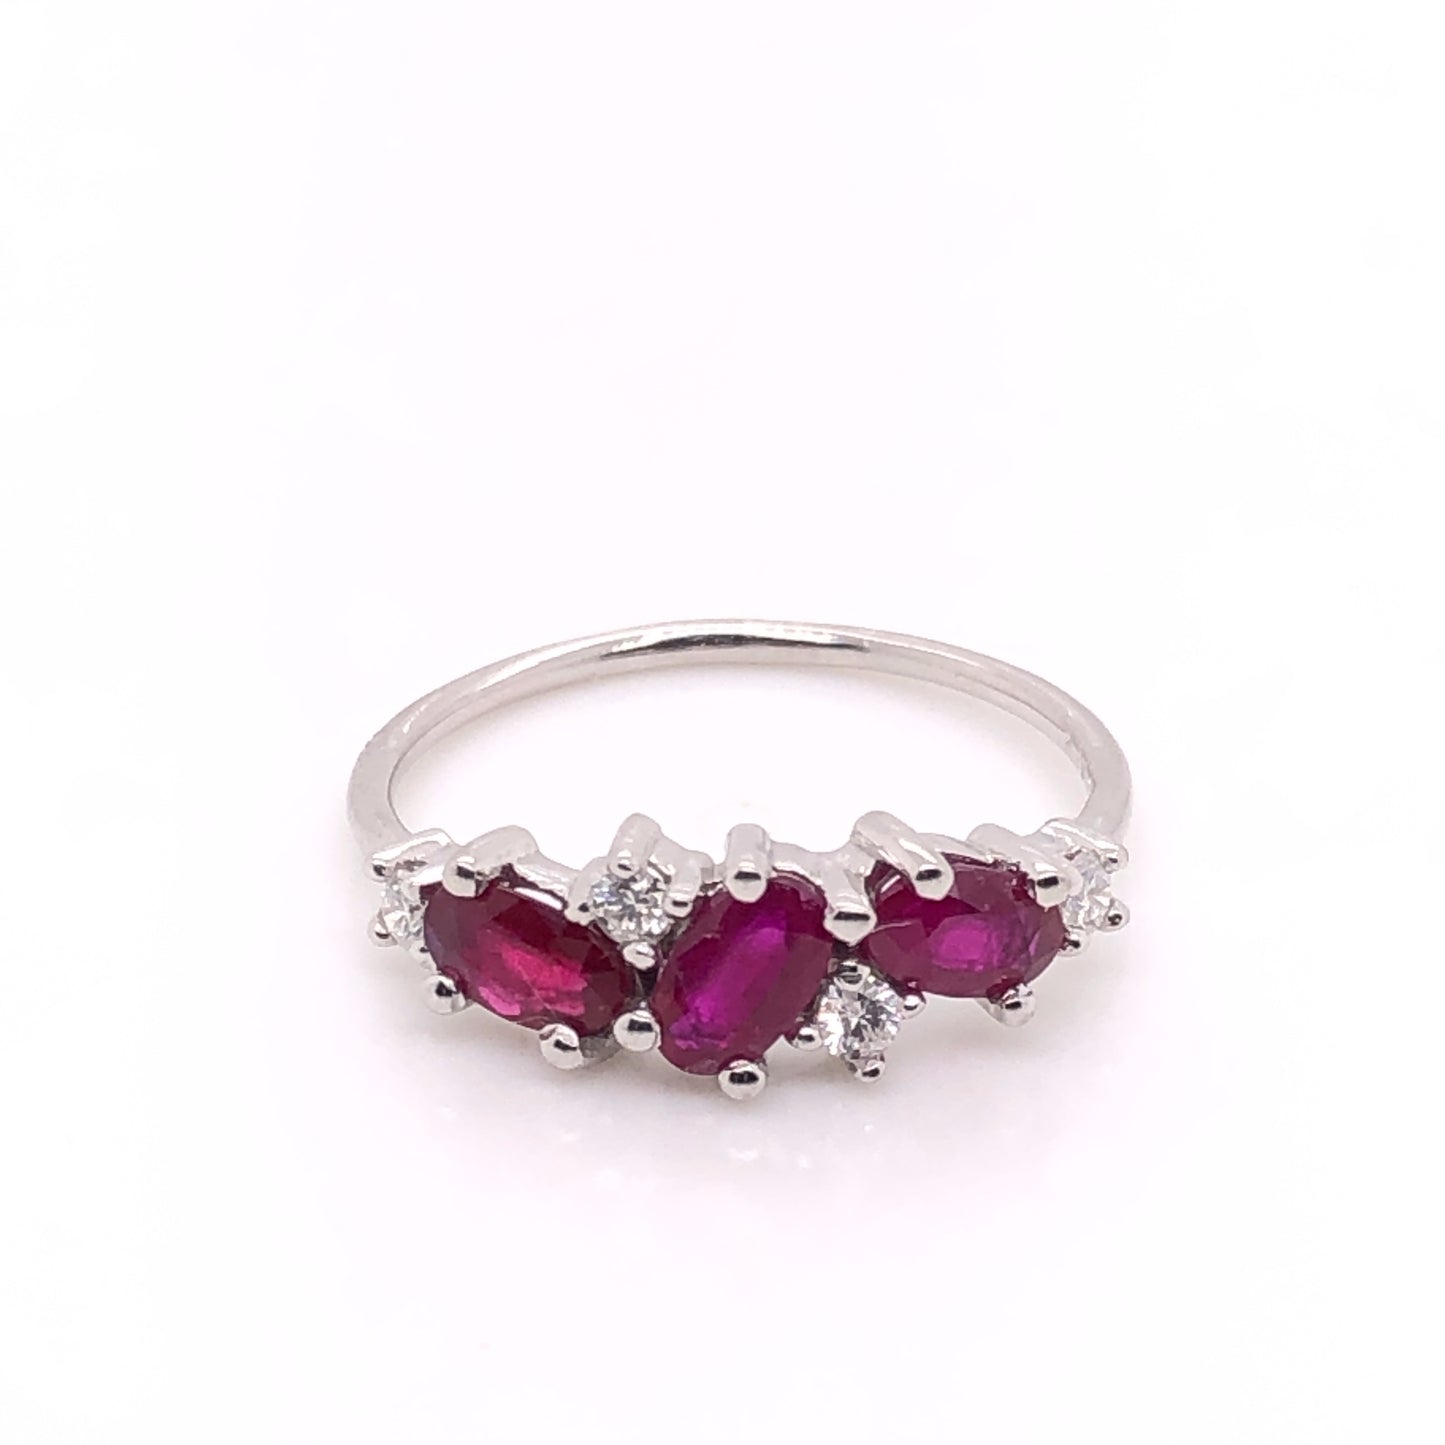 IMMEDIATE DELIVERY / Laura Ring with Rubies / 14k White Gold / Size 6